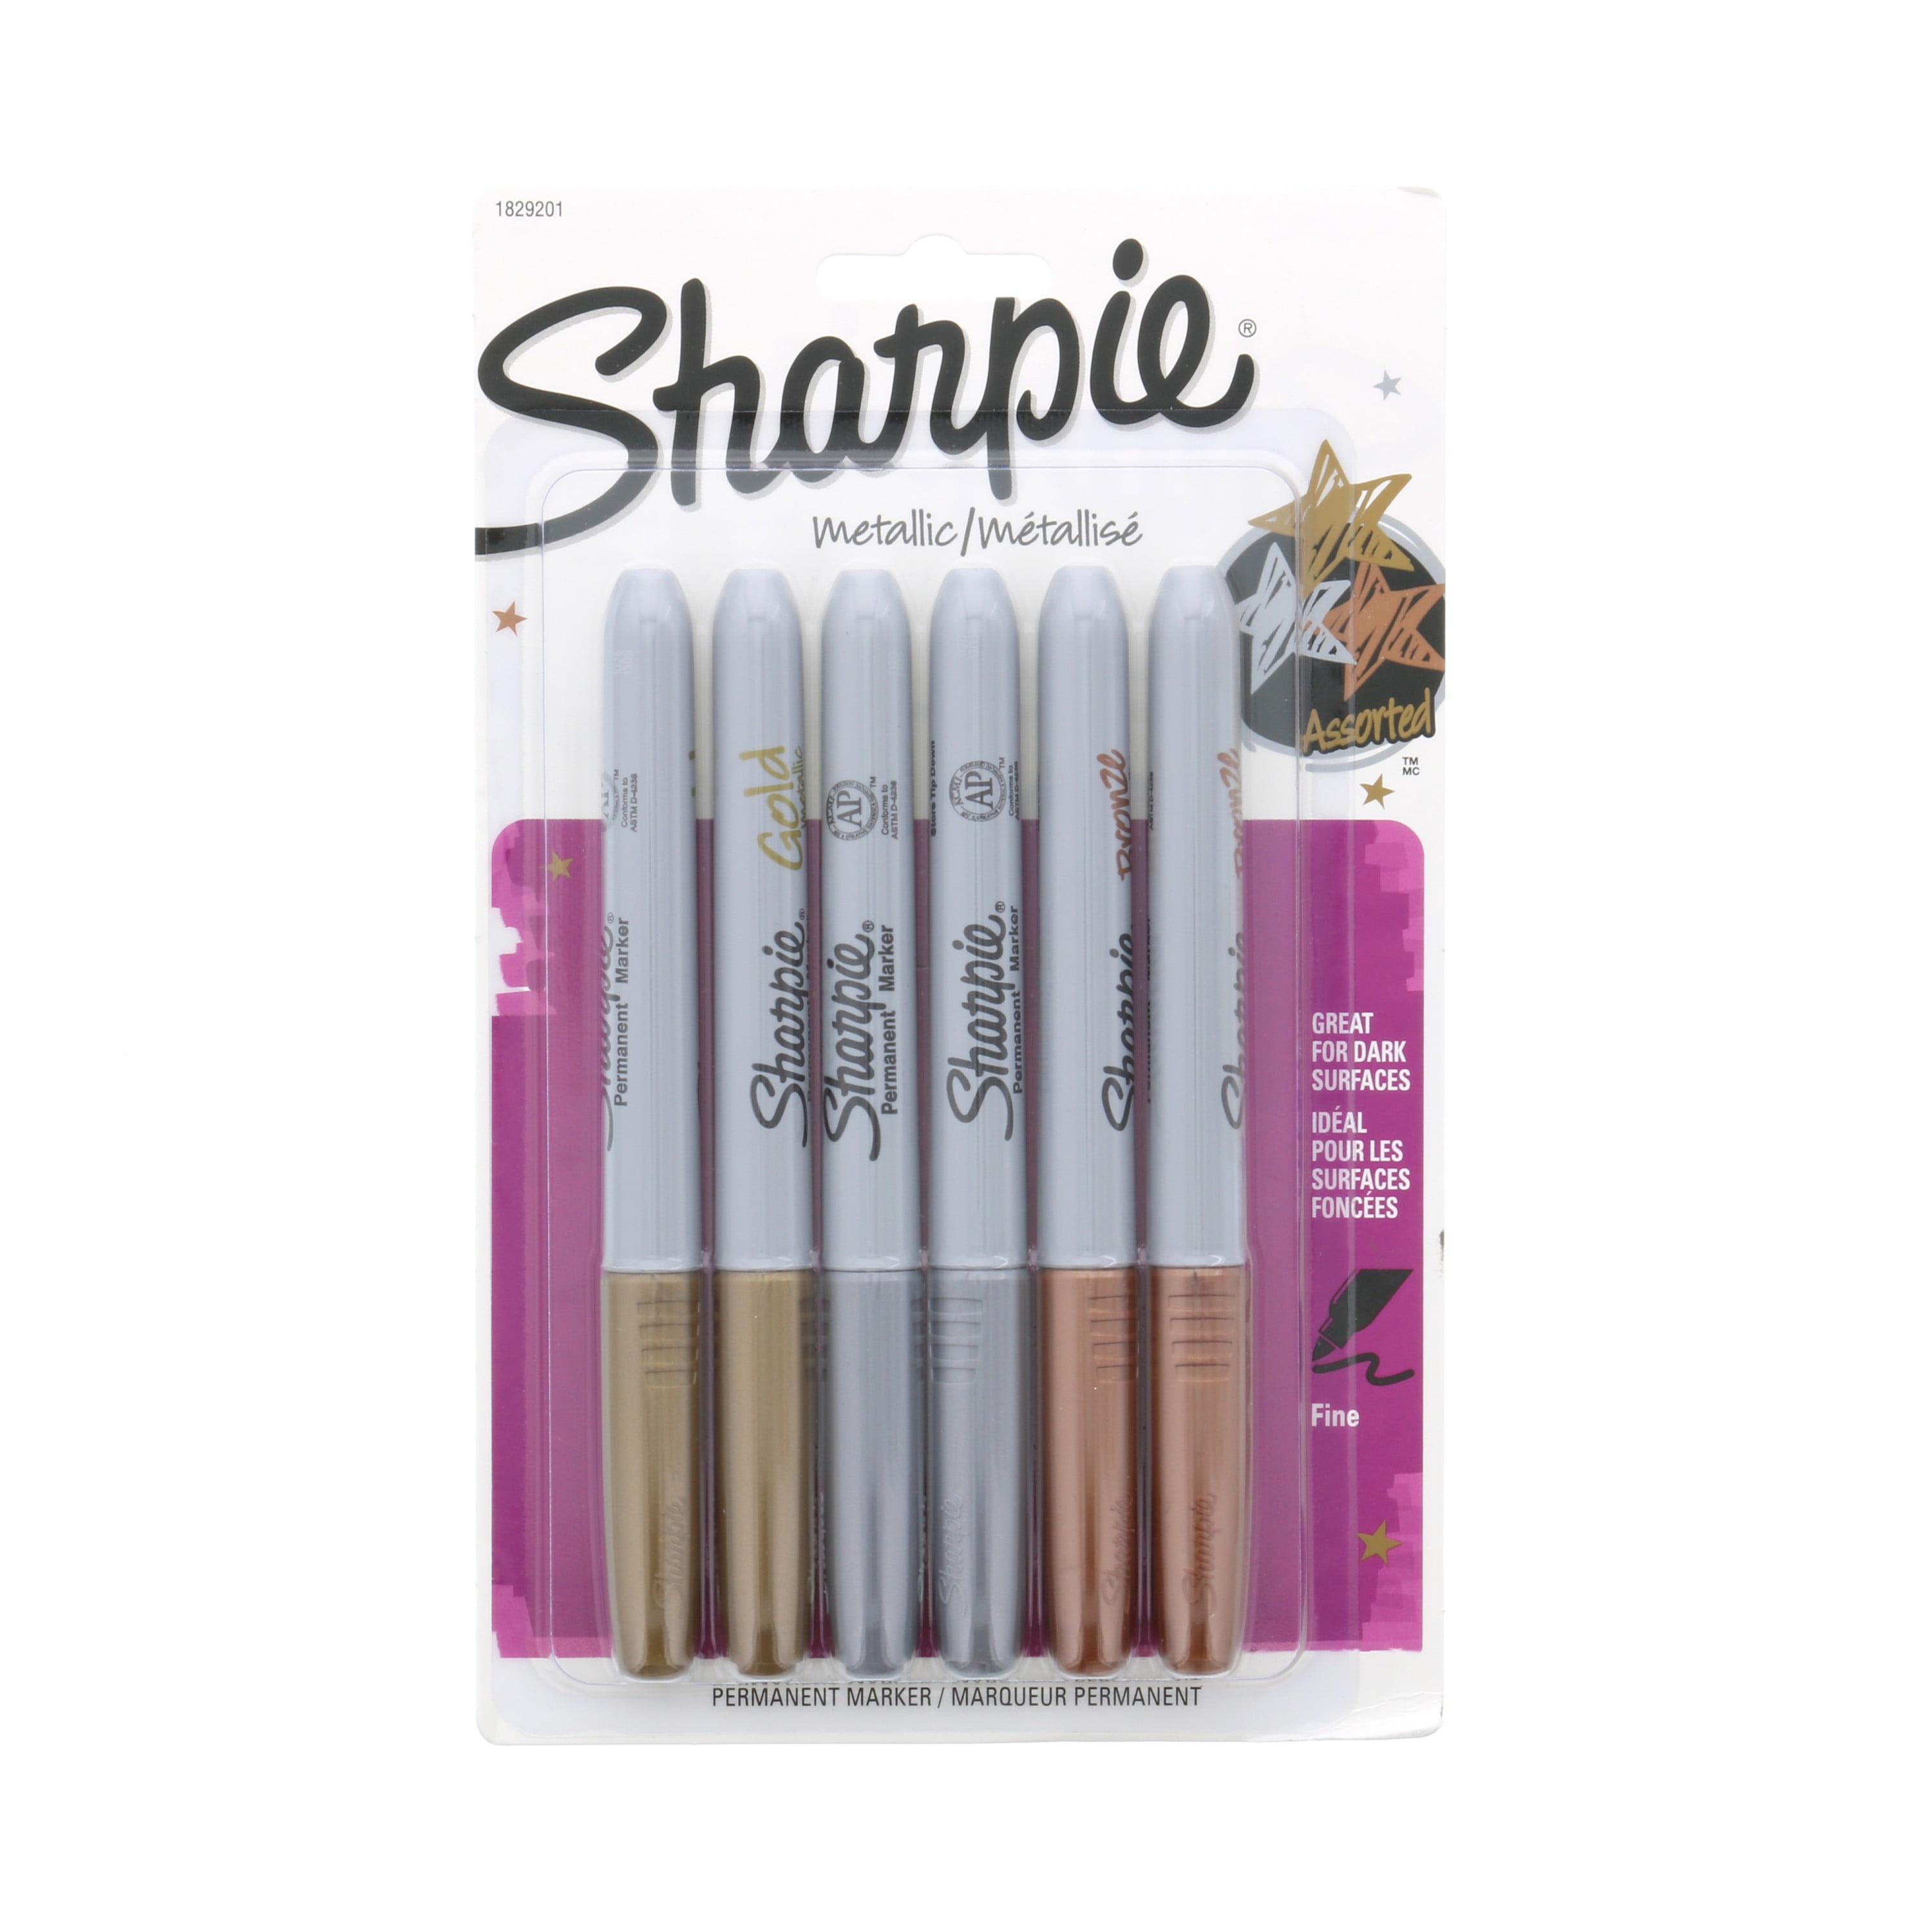 Sharpie Gold and Silver Medium Point Oil-Based Paint Marker (2-Pack)  34968PP - The Home Depot